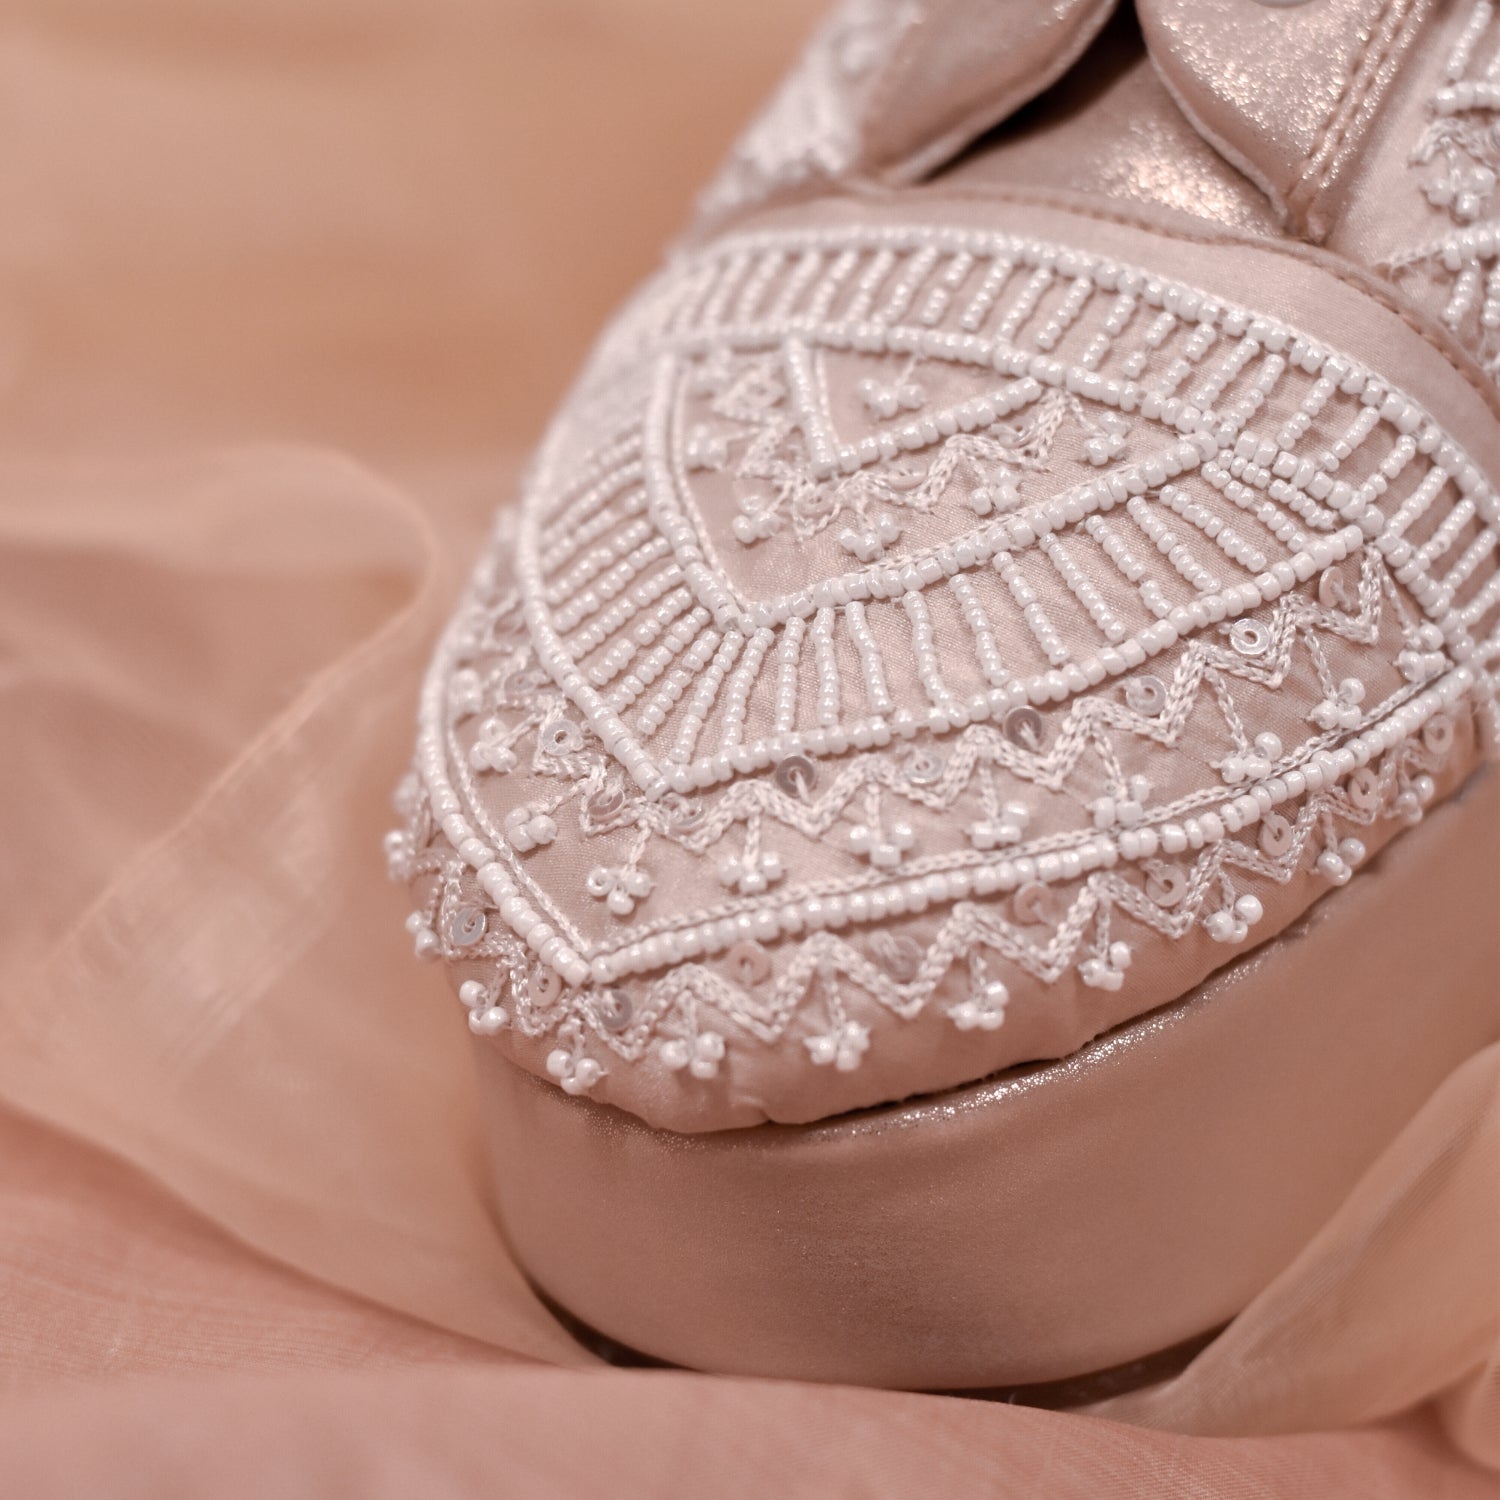 Pearl embroidered shoes for Christian wedding gowns